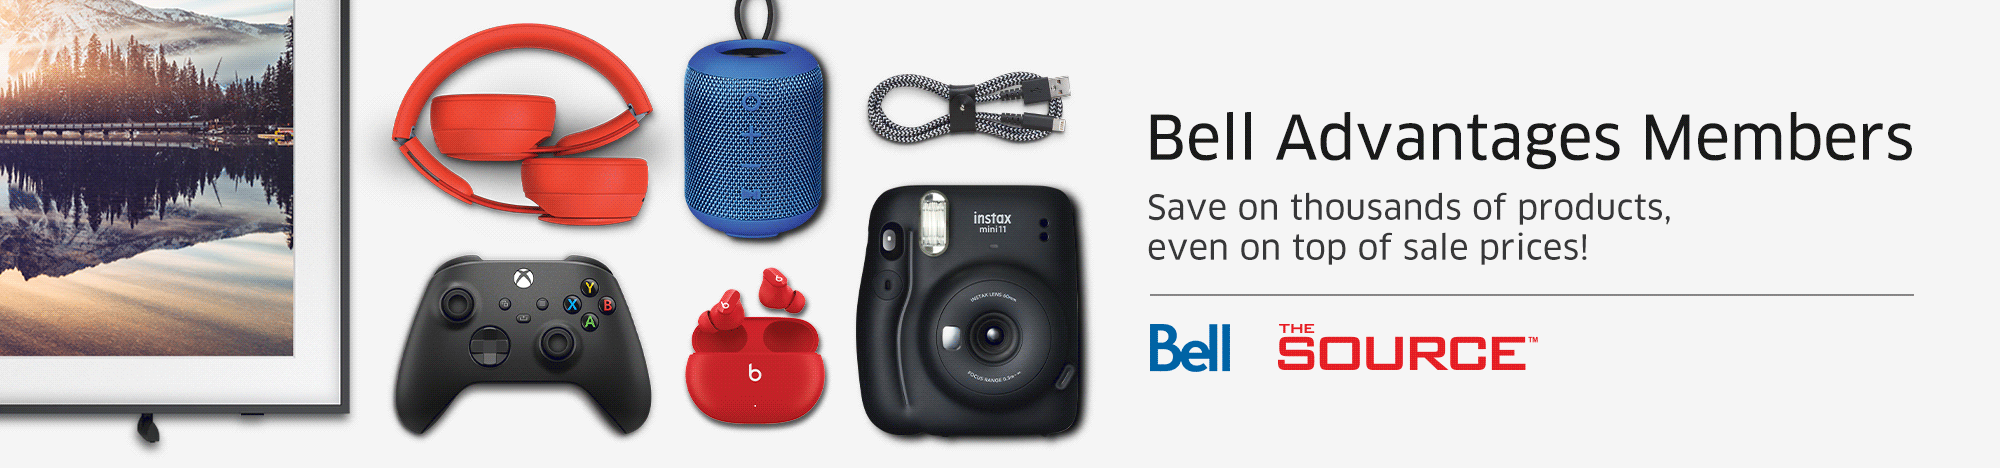 Bell Advantages Members Save on thousands of products, even on top of sale prices!